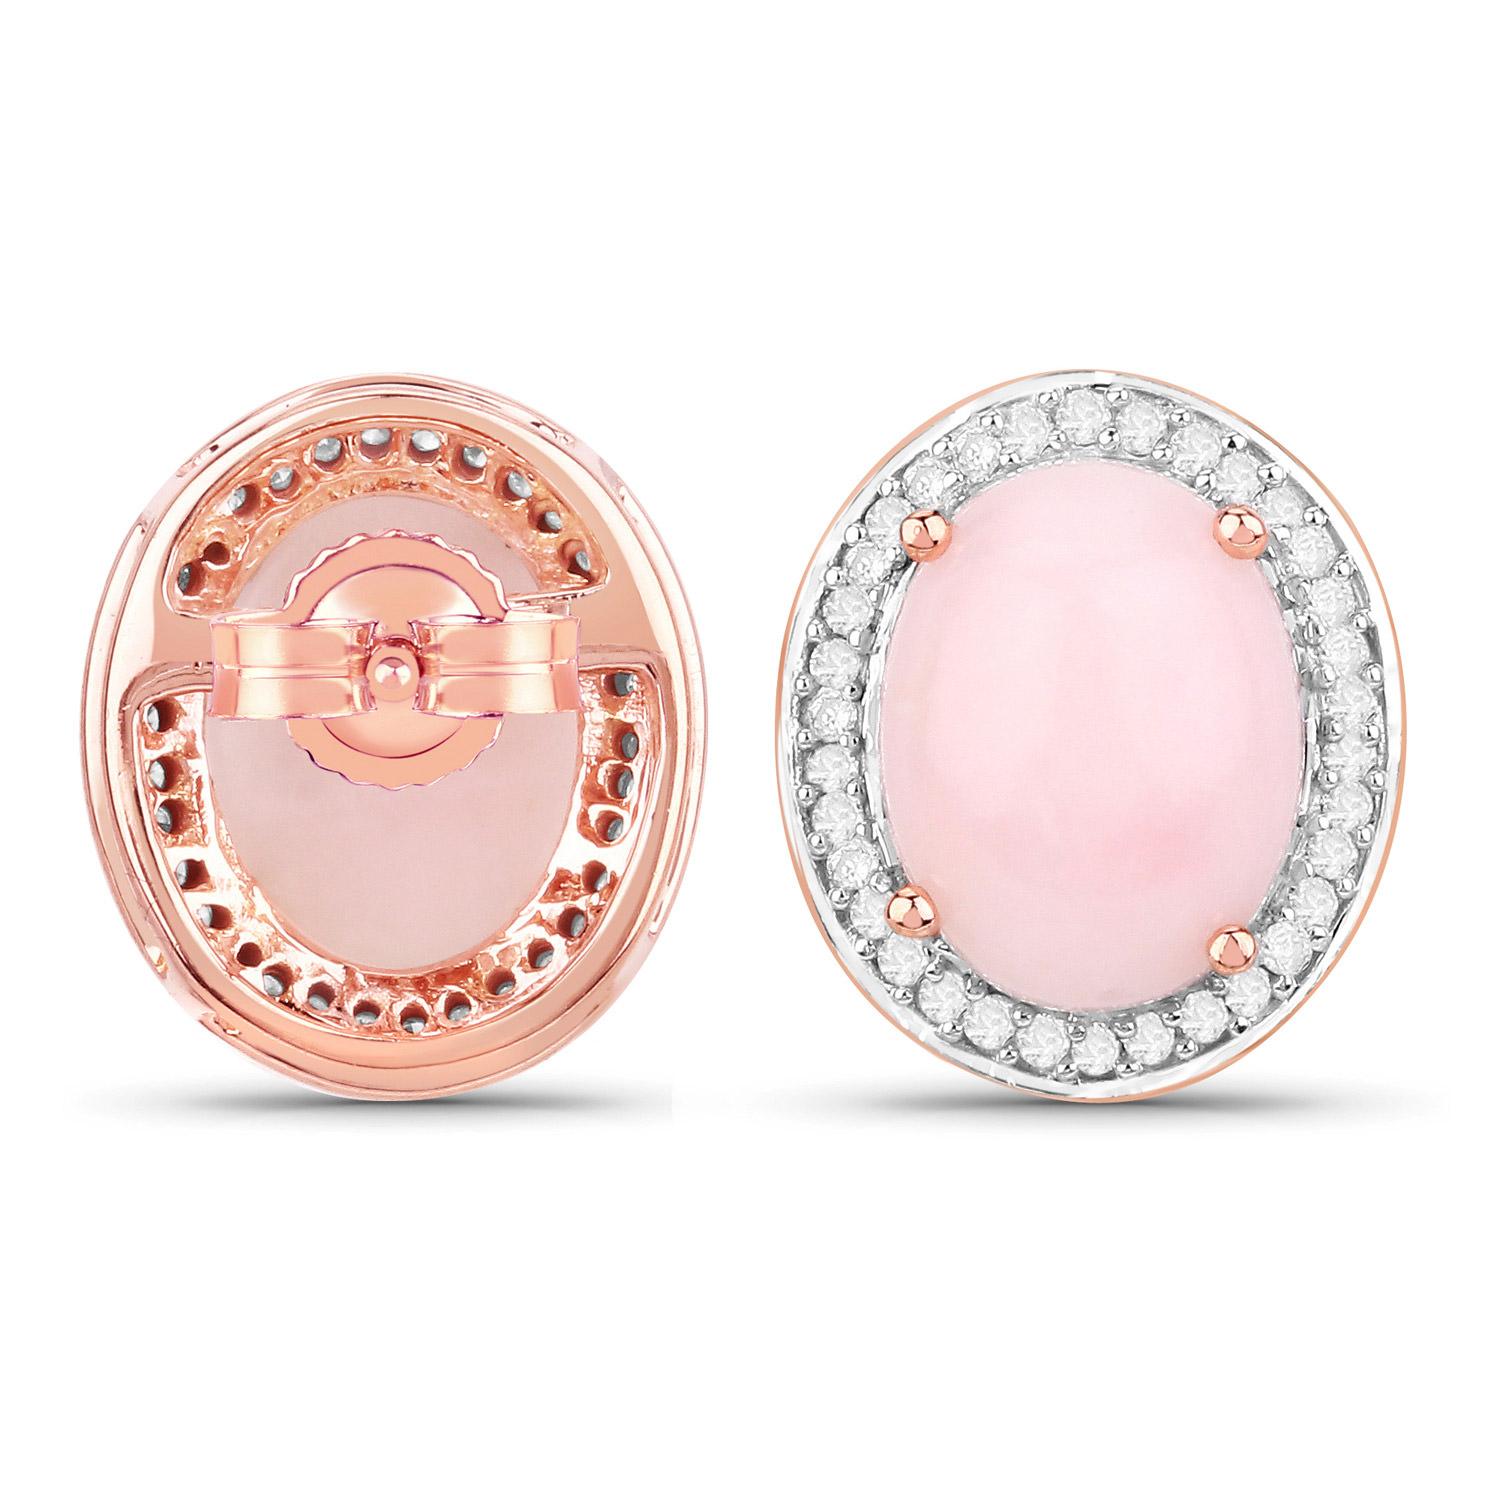 Natural Pink Opal and Diamond Earrings Total 4.25 Carats 14k Rose Gold In Excellent Condition For Sale In Laguna Niguel, CA